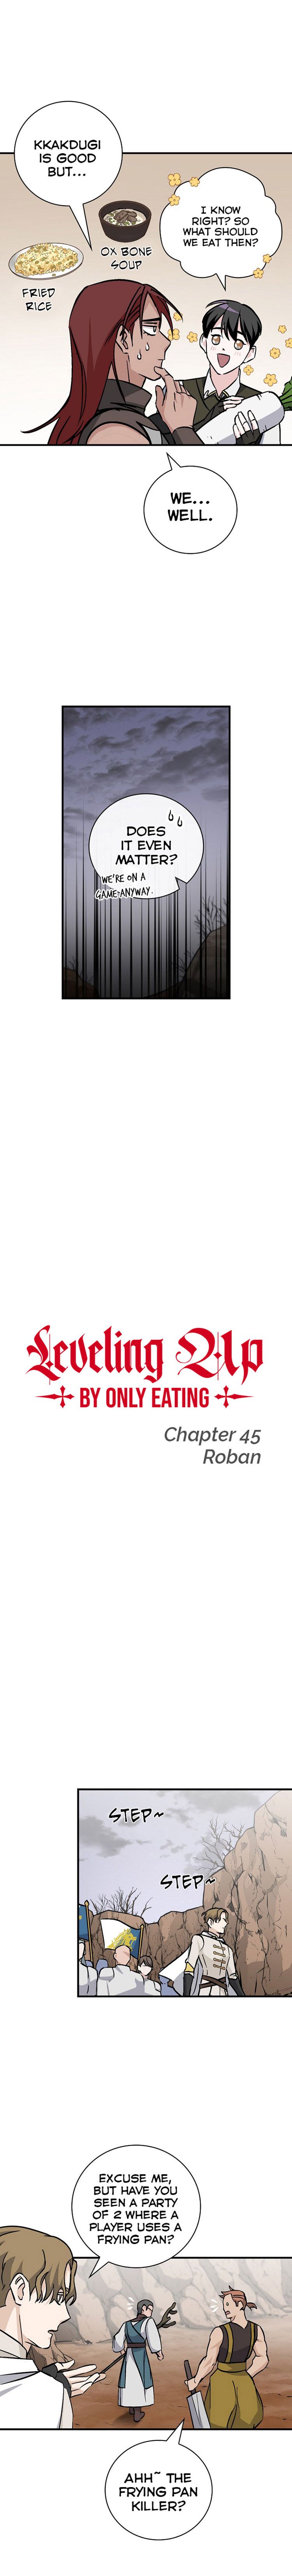 Leveling Up, by Only Eating! - Chapter 45 Page 4